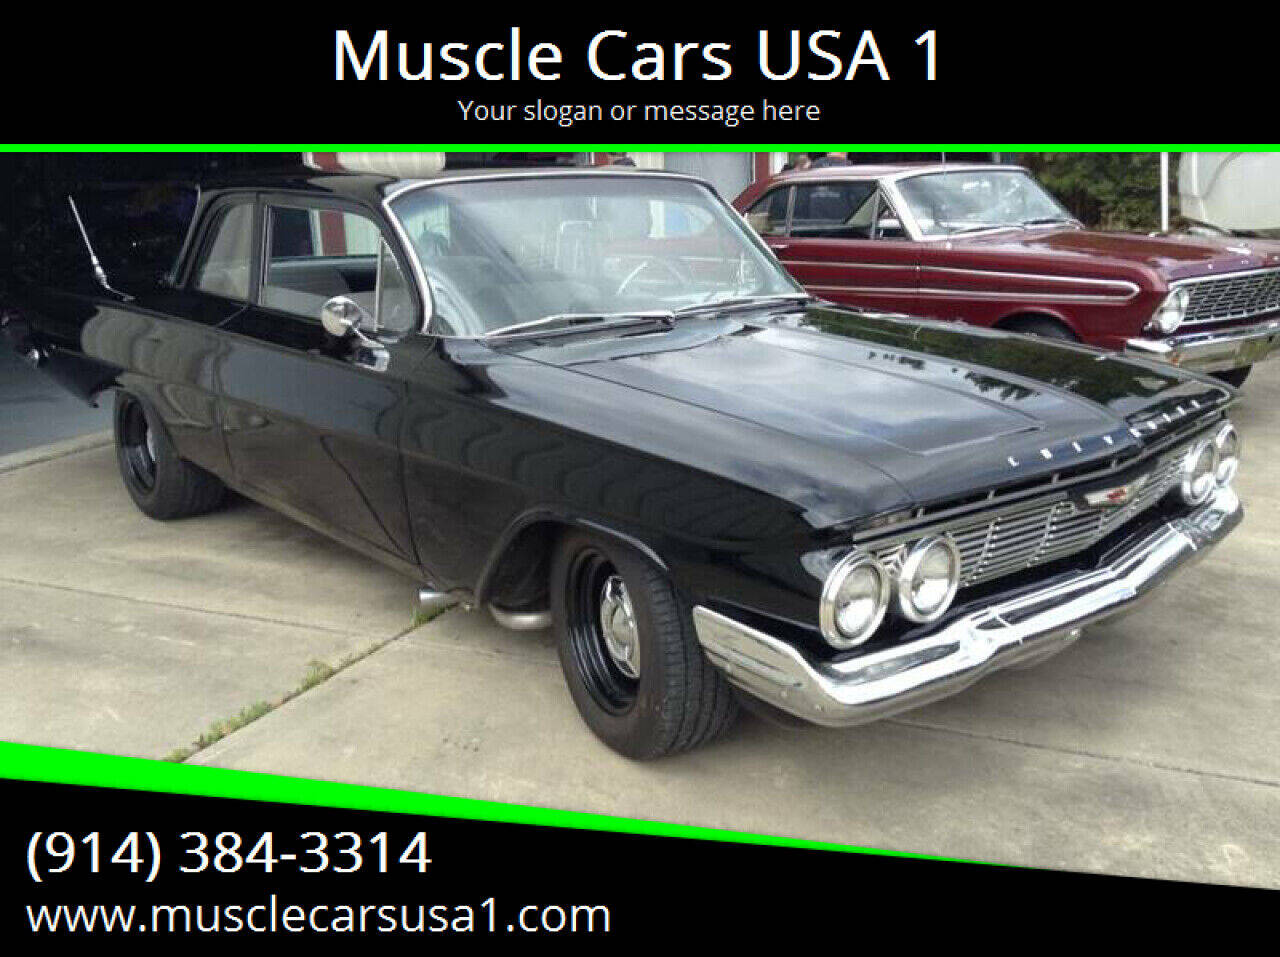 used 1961 chevrolet bel air for sale carsforsale com used 1961 chevrolet bel air for sale